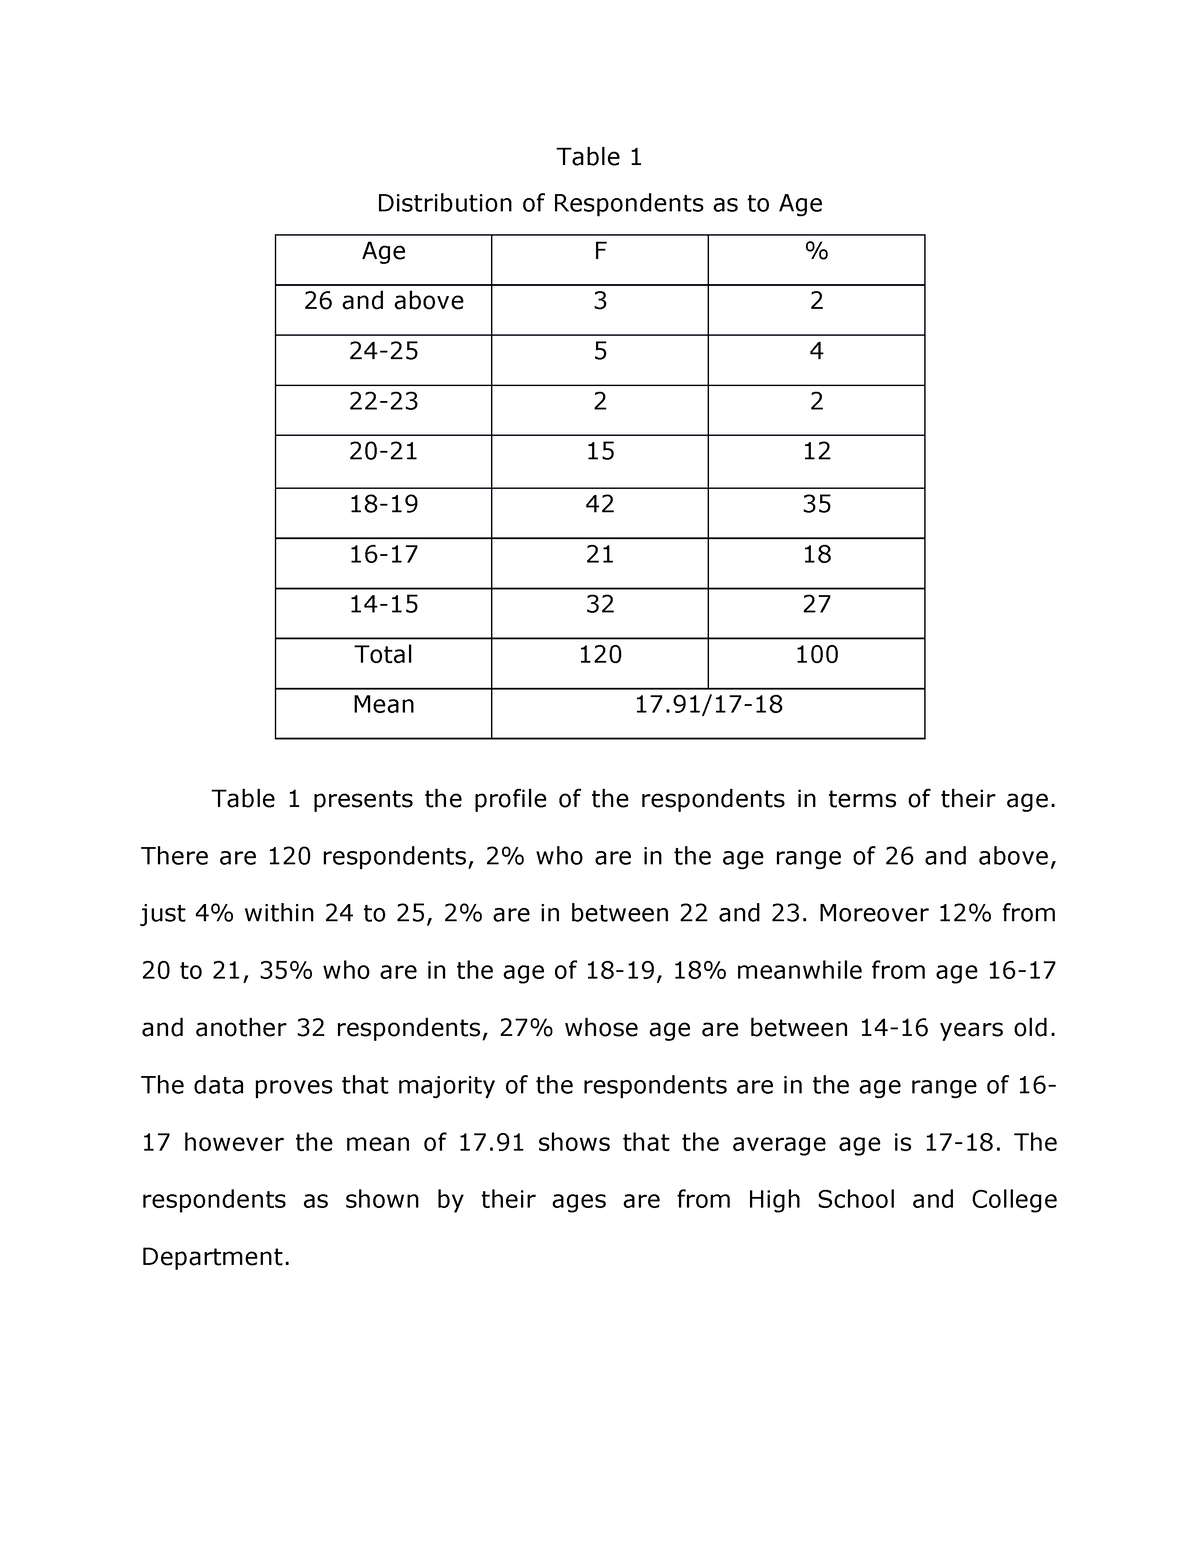 Sample Results Final Table 1 Distribution Of Respondents As To Age Age F 26 And Above 3 2 24 